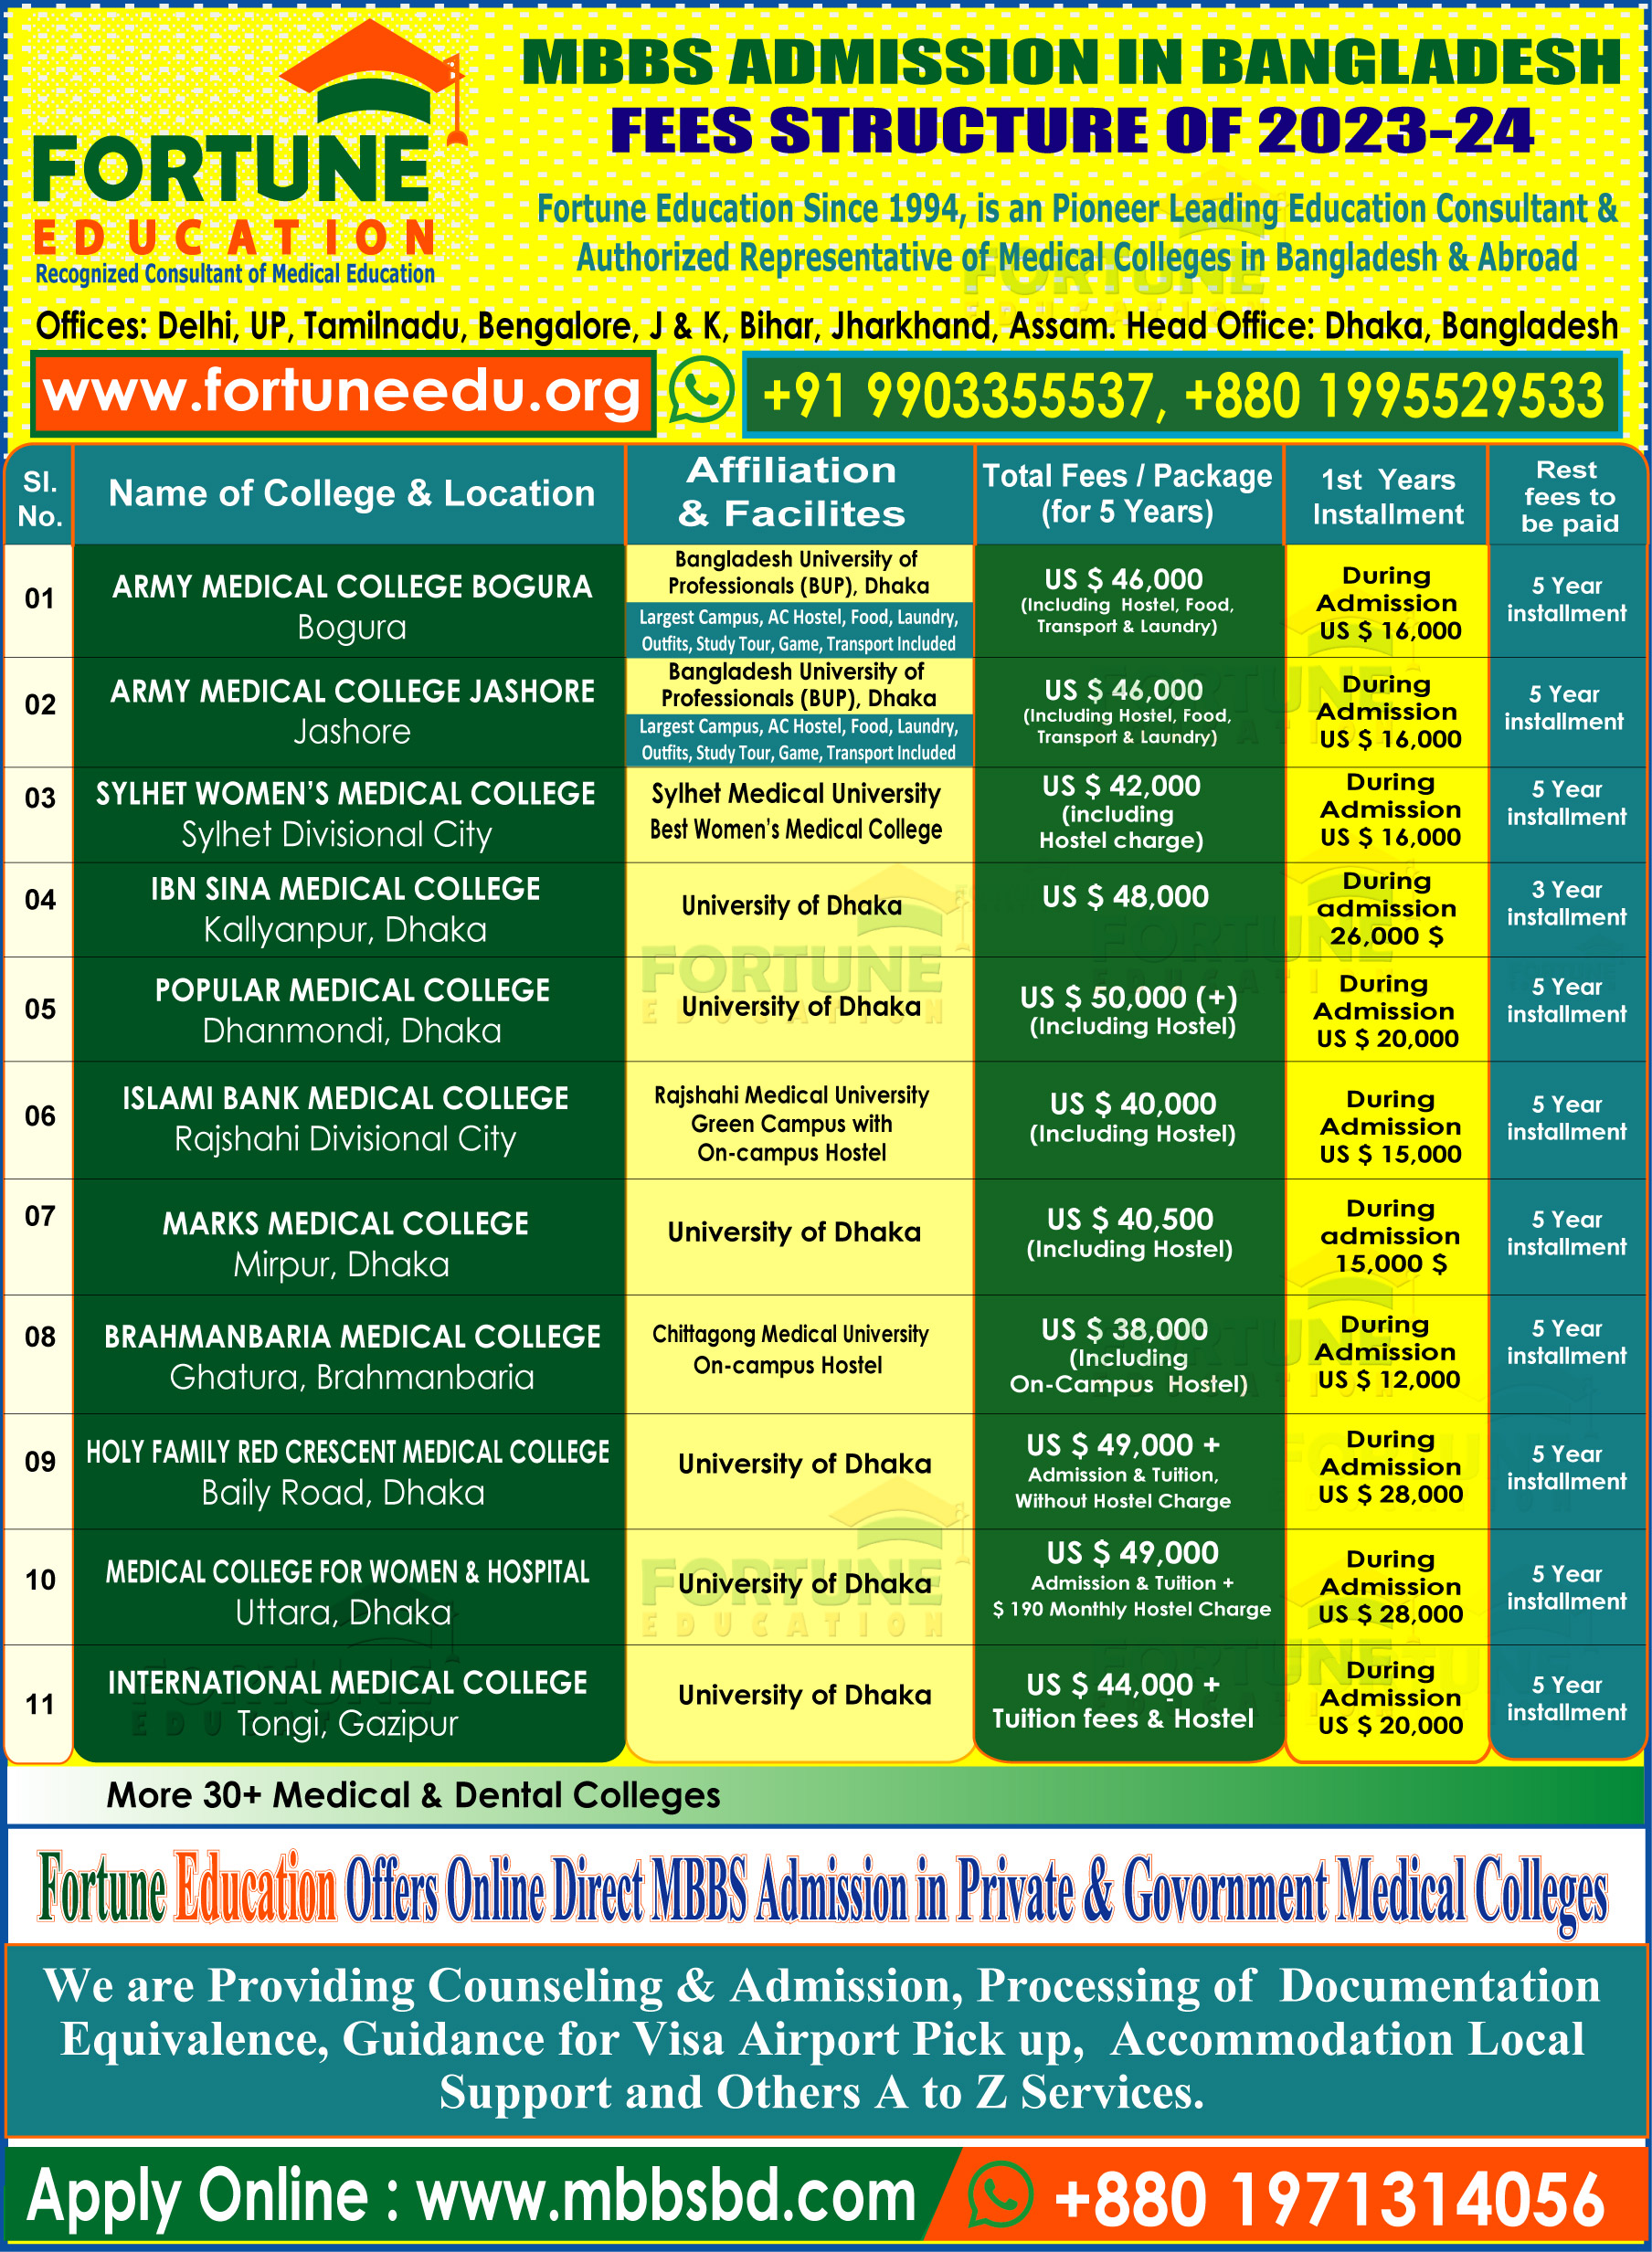 MBBS Fees Structure For Foreign Students 